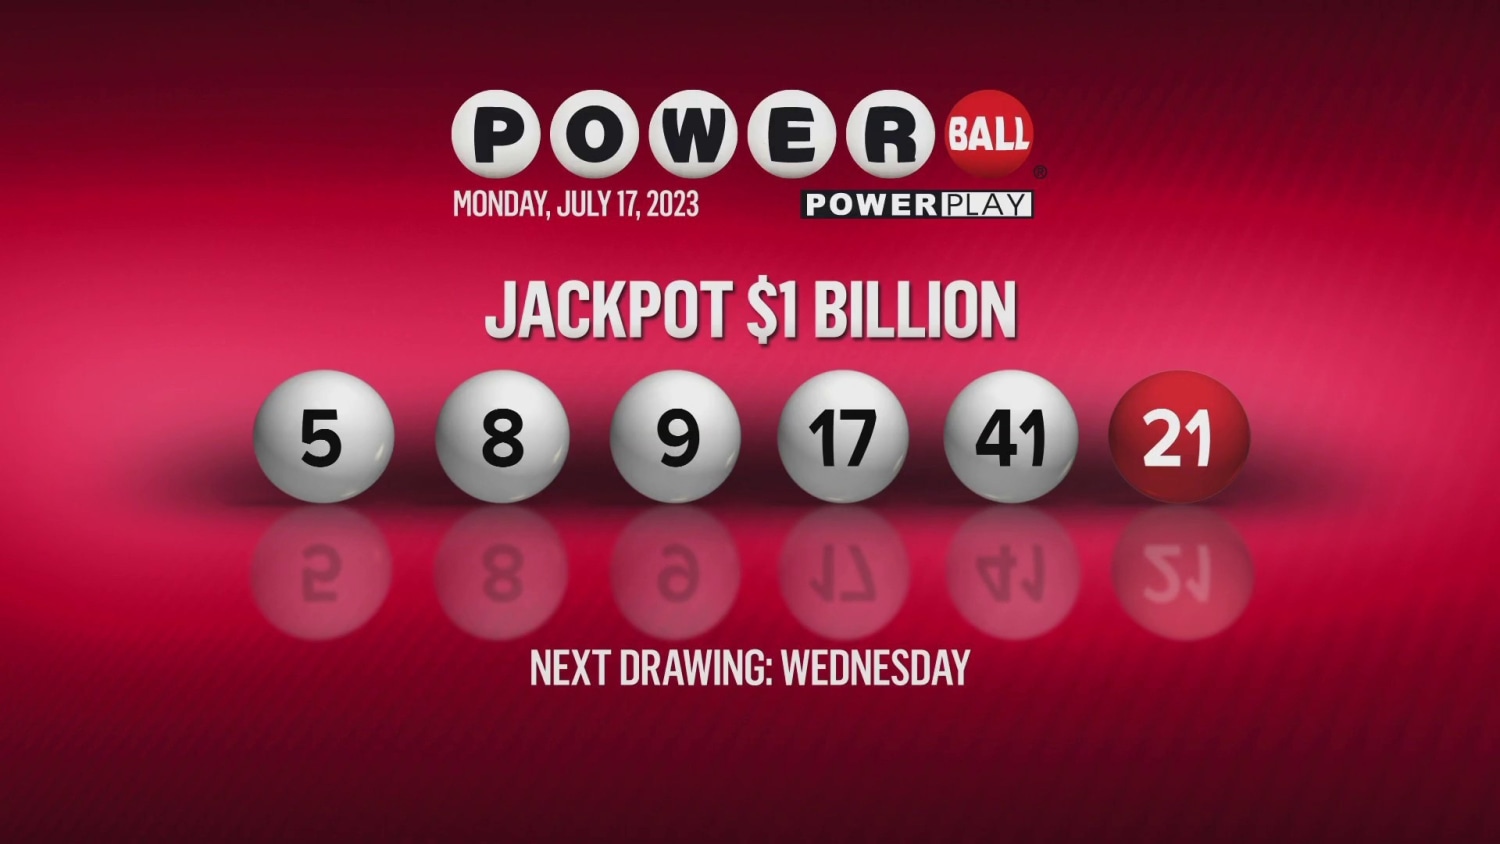 One Powerball ticket in Connecticut won $1 million – NBC Connecticut